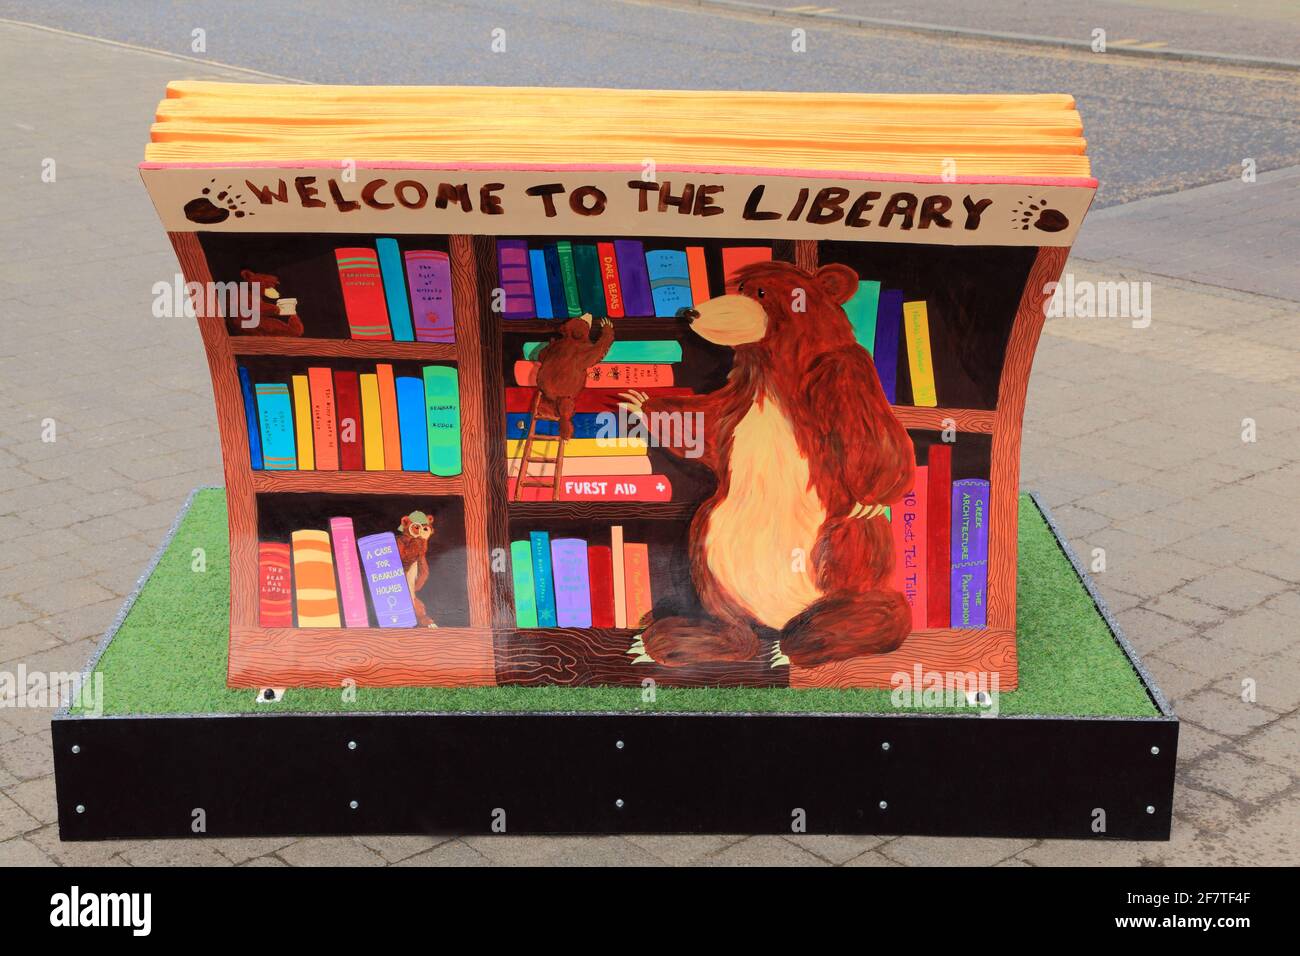 Book Bench Trail, painted public bench, Bear imagery, Hunstanton, Norfolk, England Stock Photo